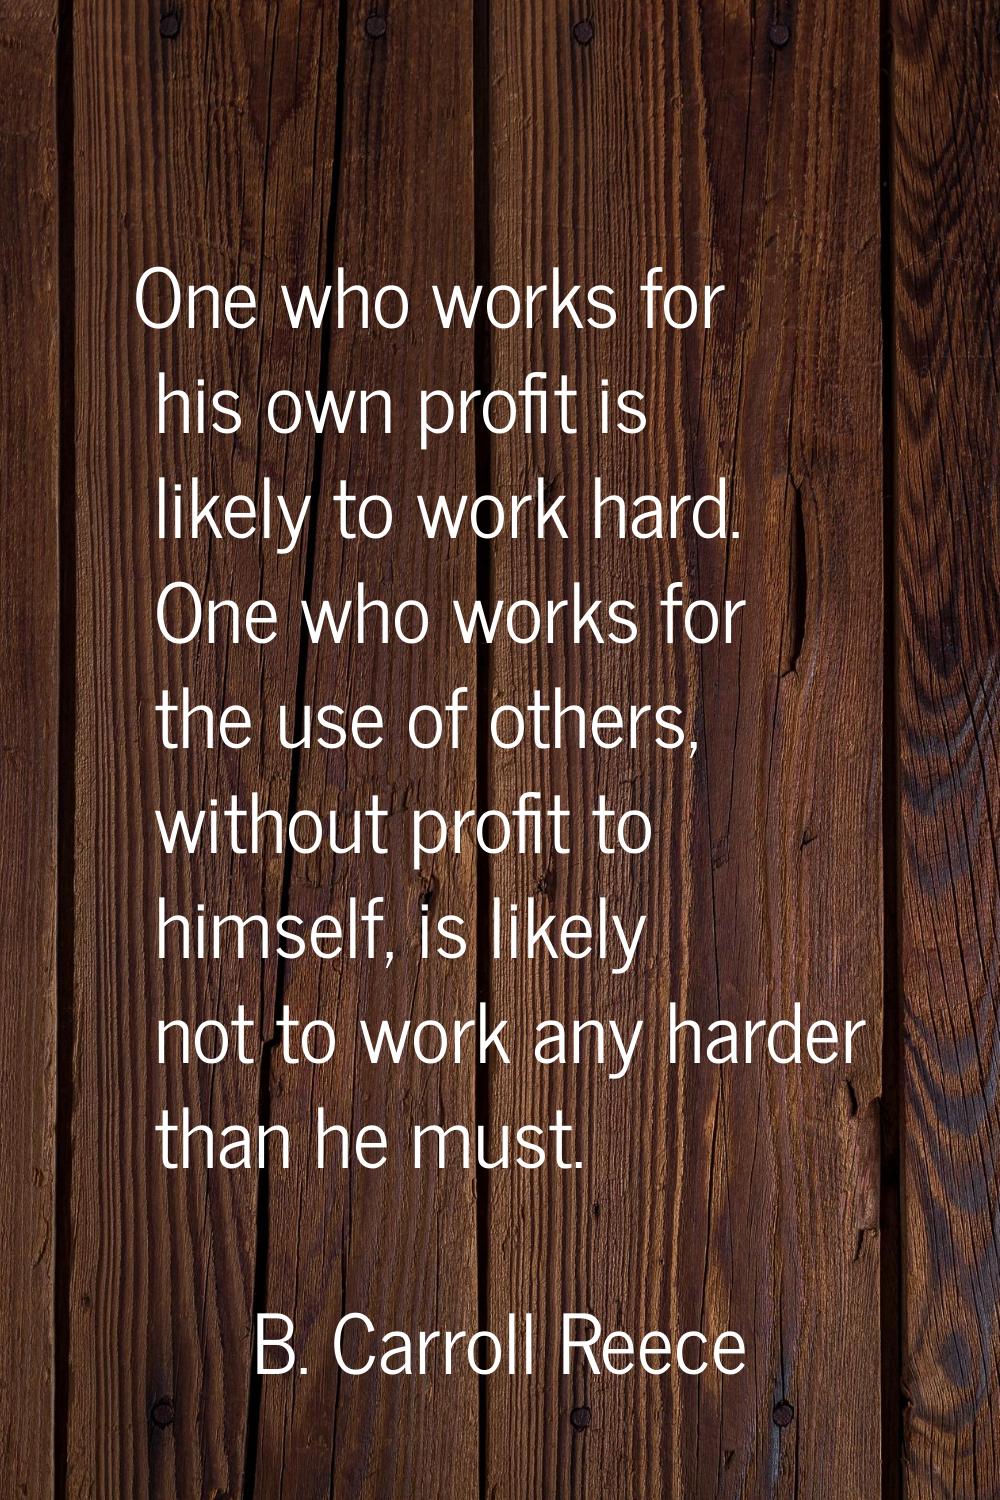 One who works for his own profit is likely to work hard. One who works for the use of others, witho